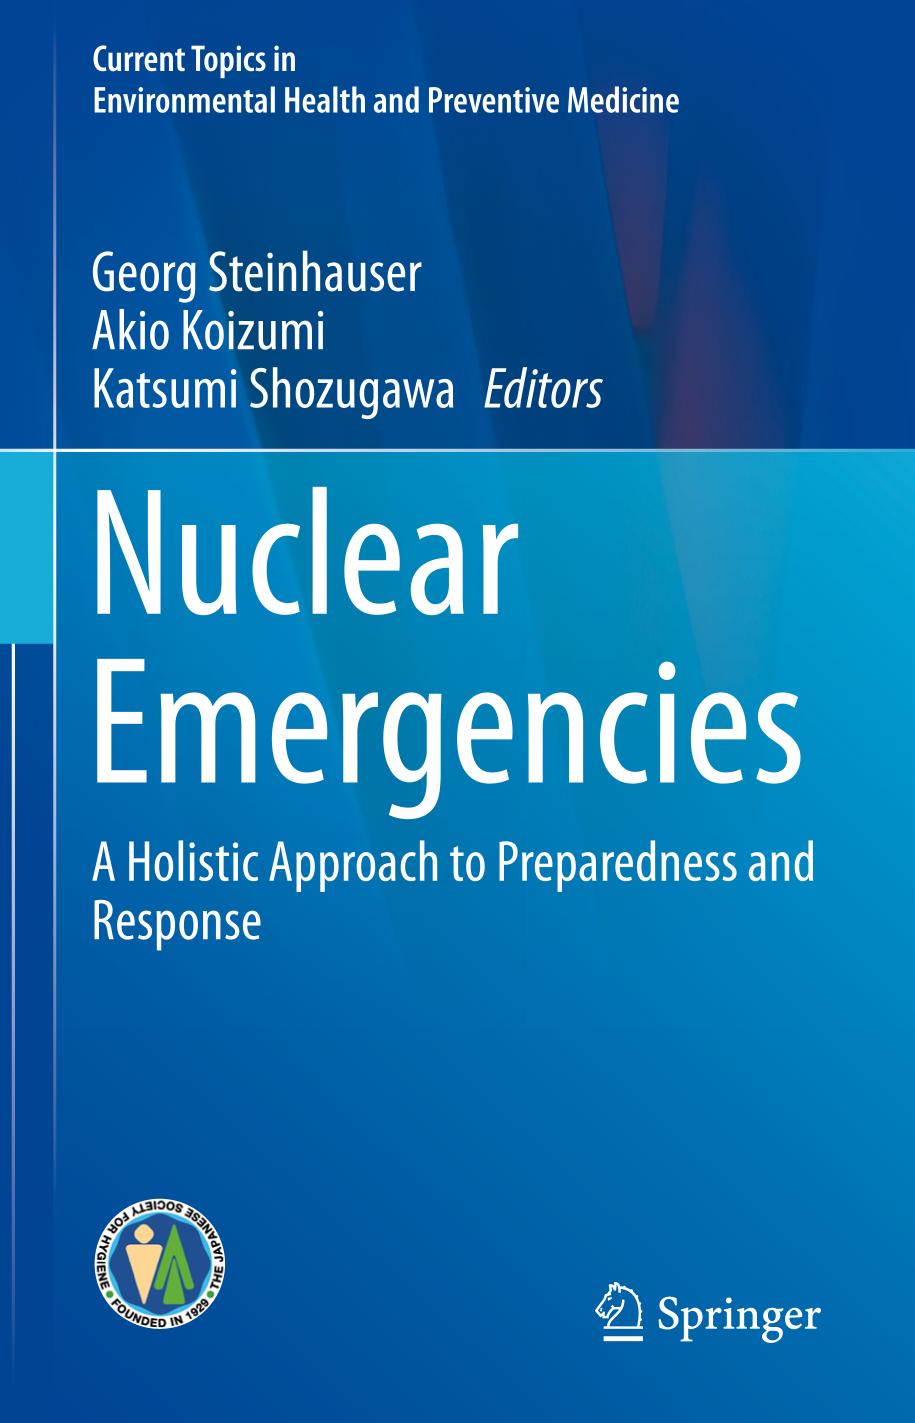 Nuclear emergencies : a holistic approach to preparedness and response